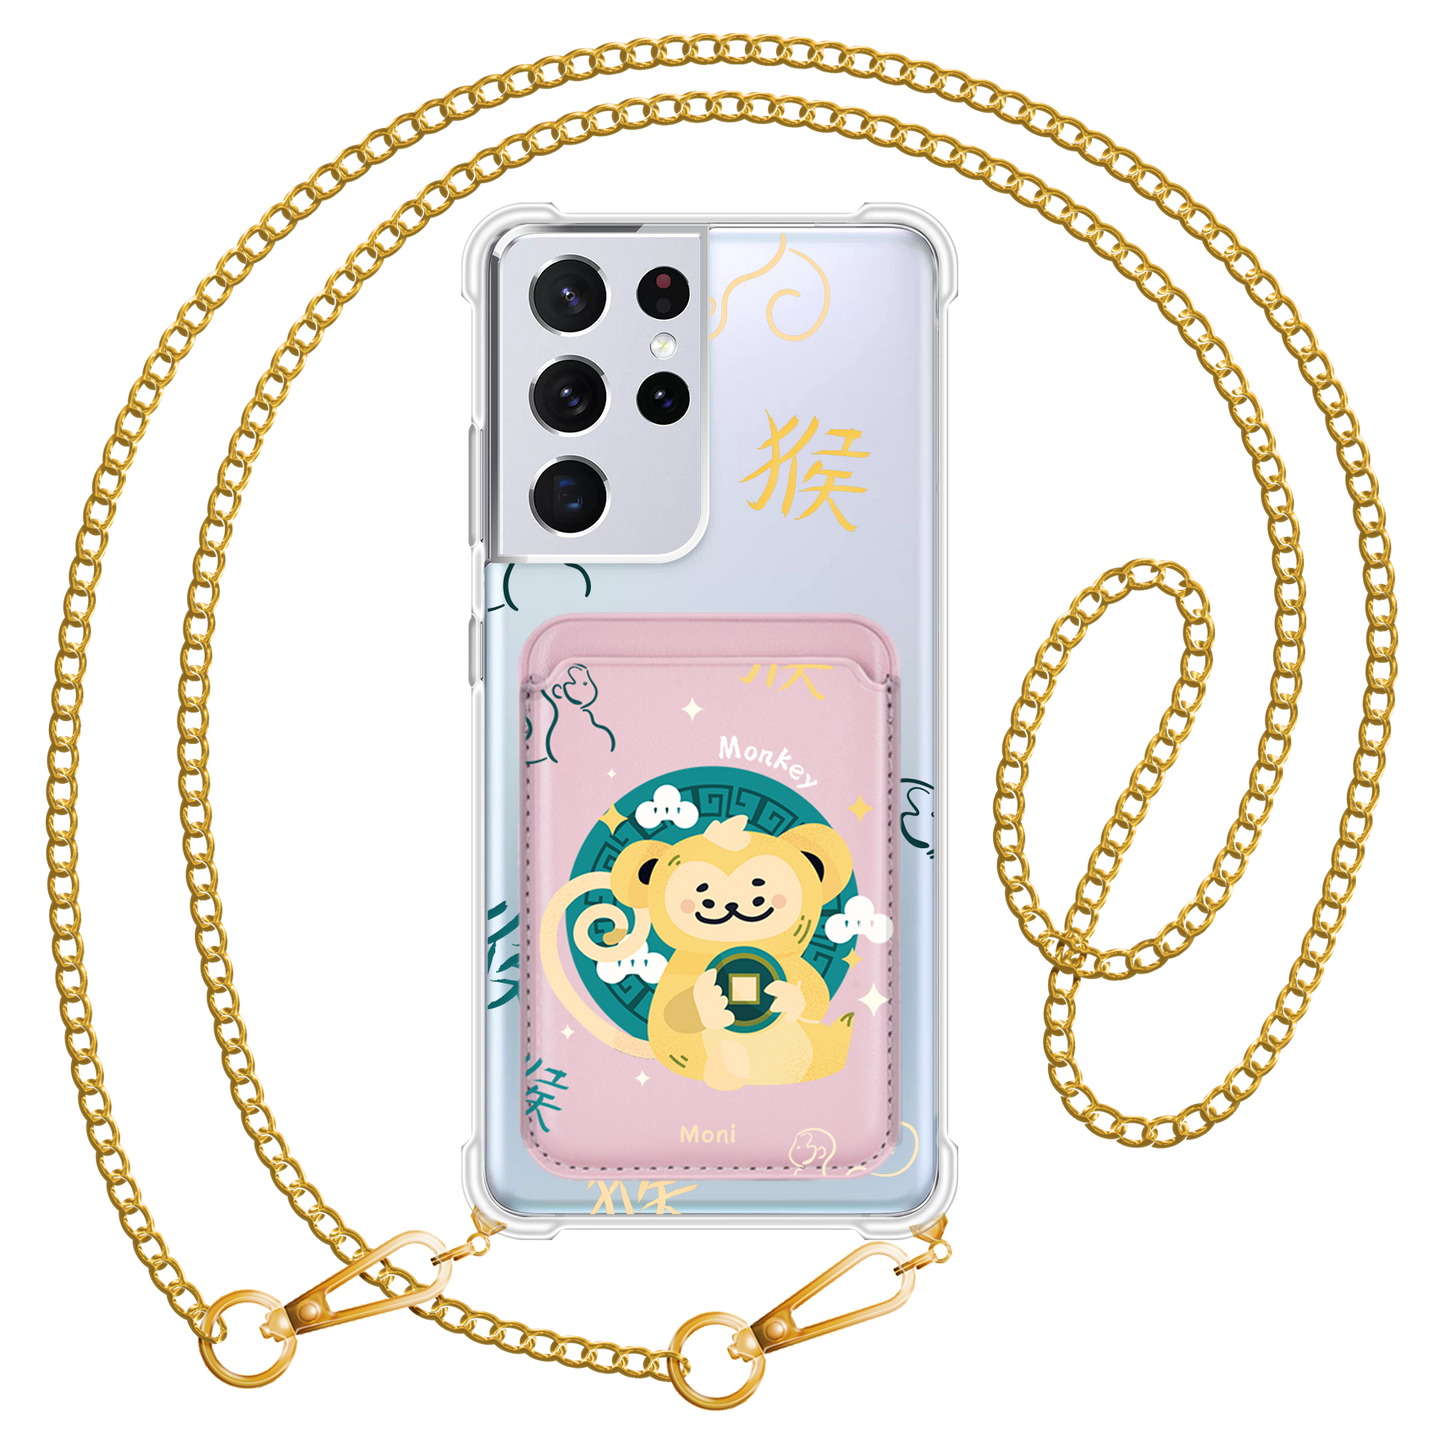 Android Magnetic Wallet Case - Monkey (Chinese Zodiac / Shio)